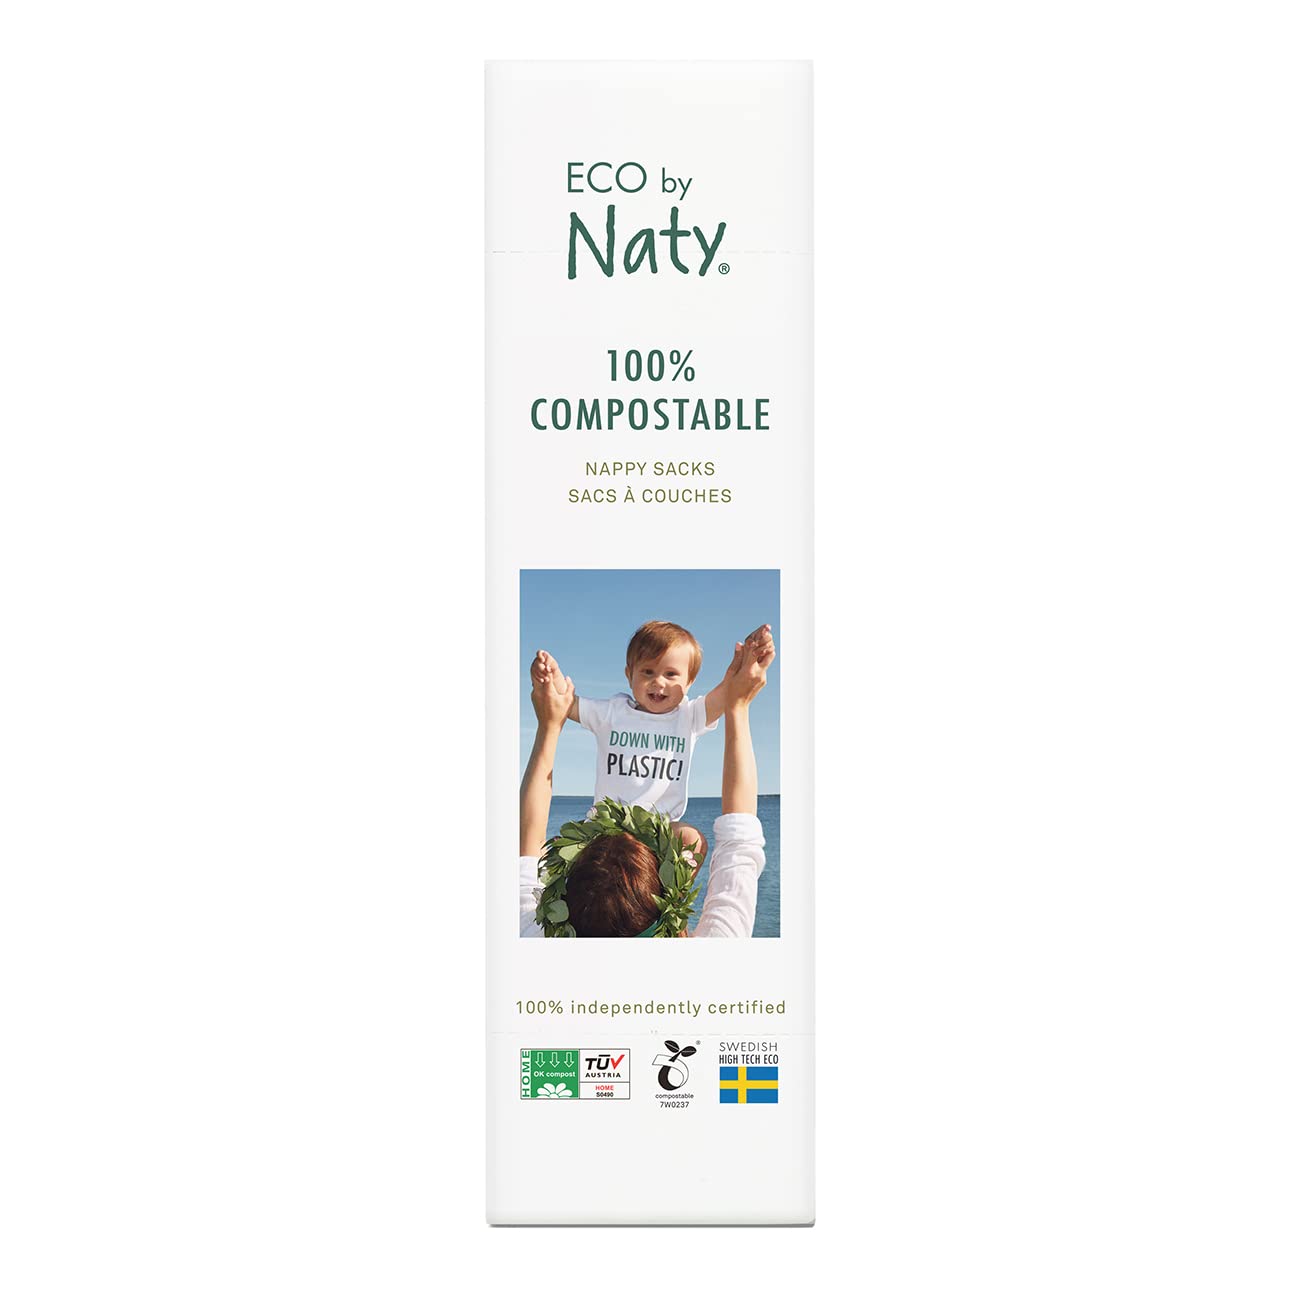 Eco by Naty, Ecological Disposal Bags, Pack of 50 pieces, 100% Compostable